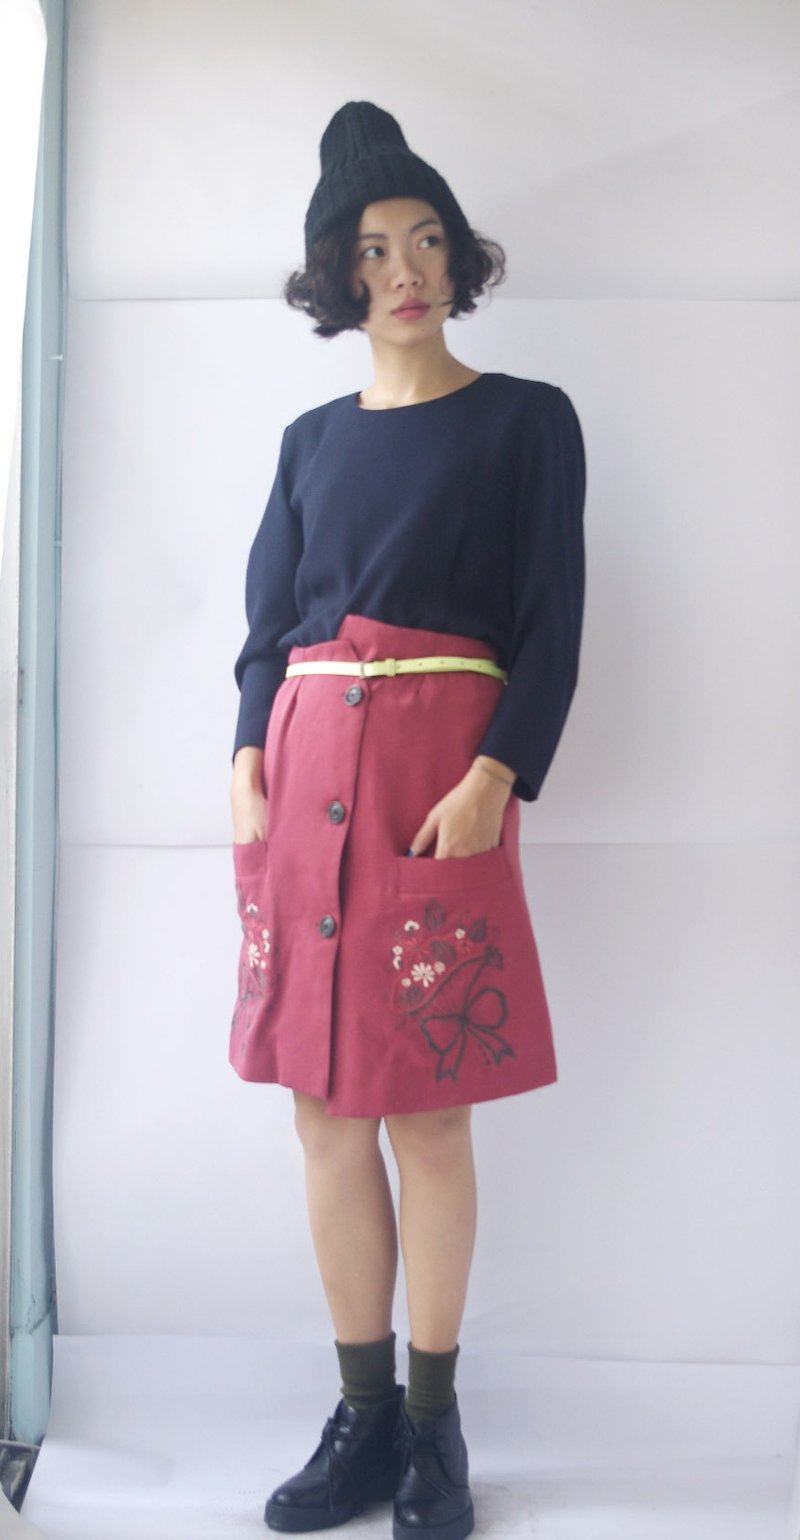 4.5studio- [Re;] - resyle transformation vintage - MEI large pockets embroidered a skirt - กระโปรง - เส้นใยสังเคราะห์ สึชมพู